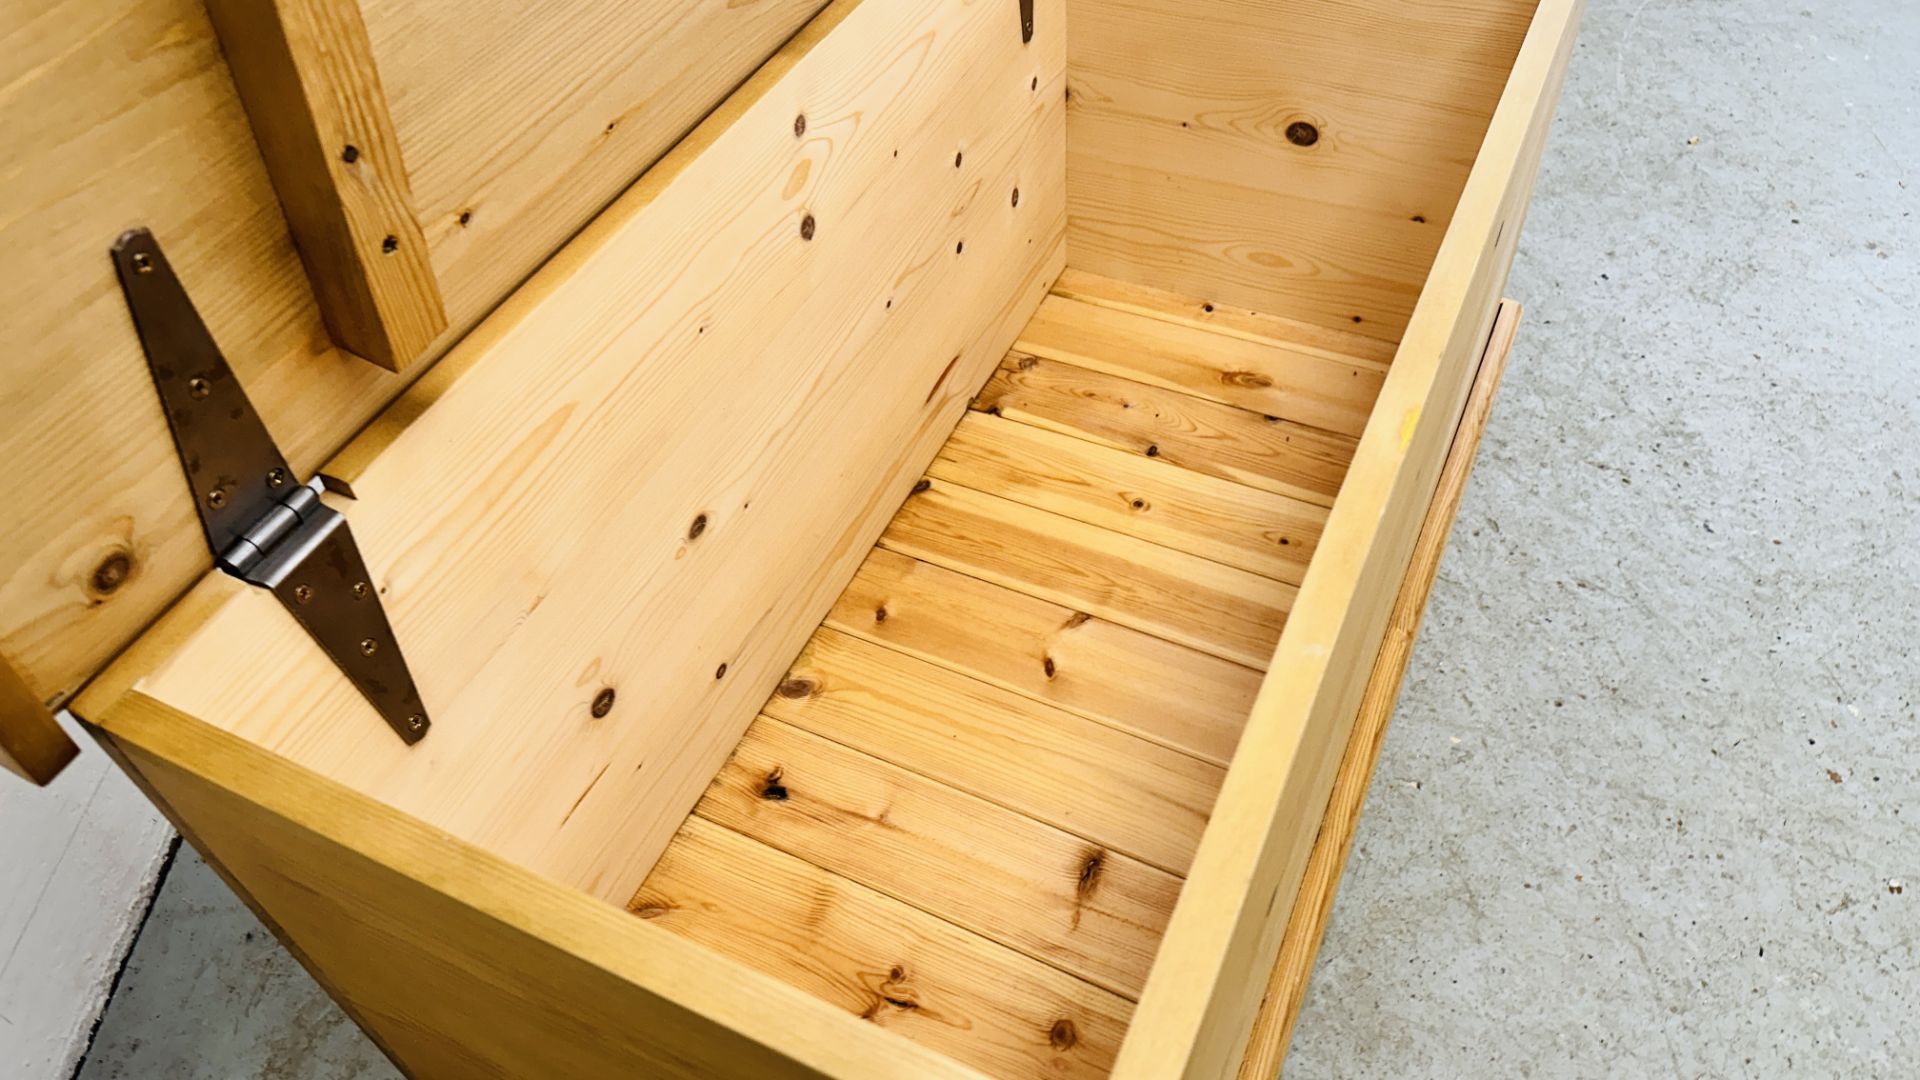 MODERN WAXED PINE HINGED TOP BLANKET / TOY BOX - W 96CM X D 44CM X H 50CM. - Image 6 of 7